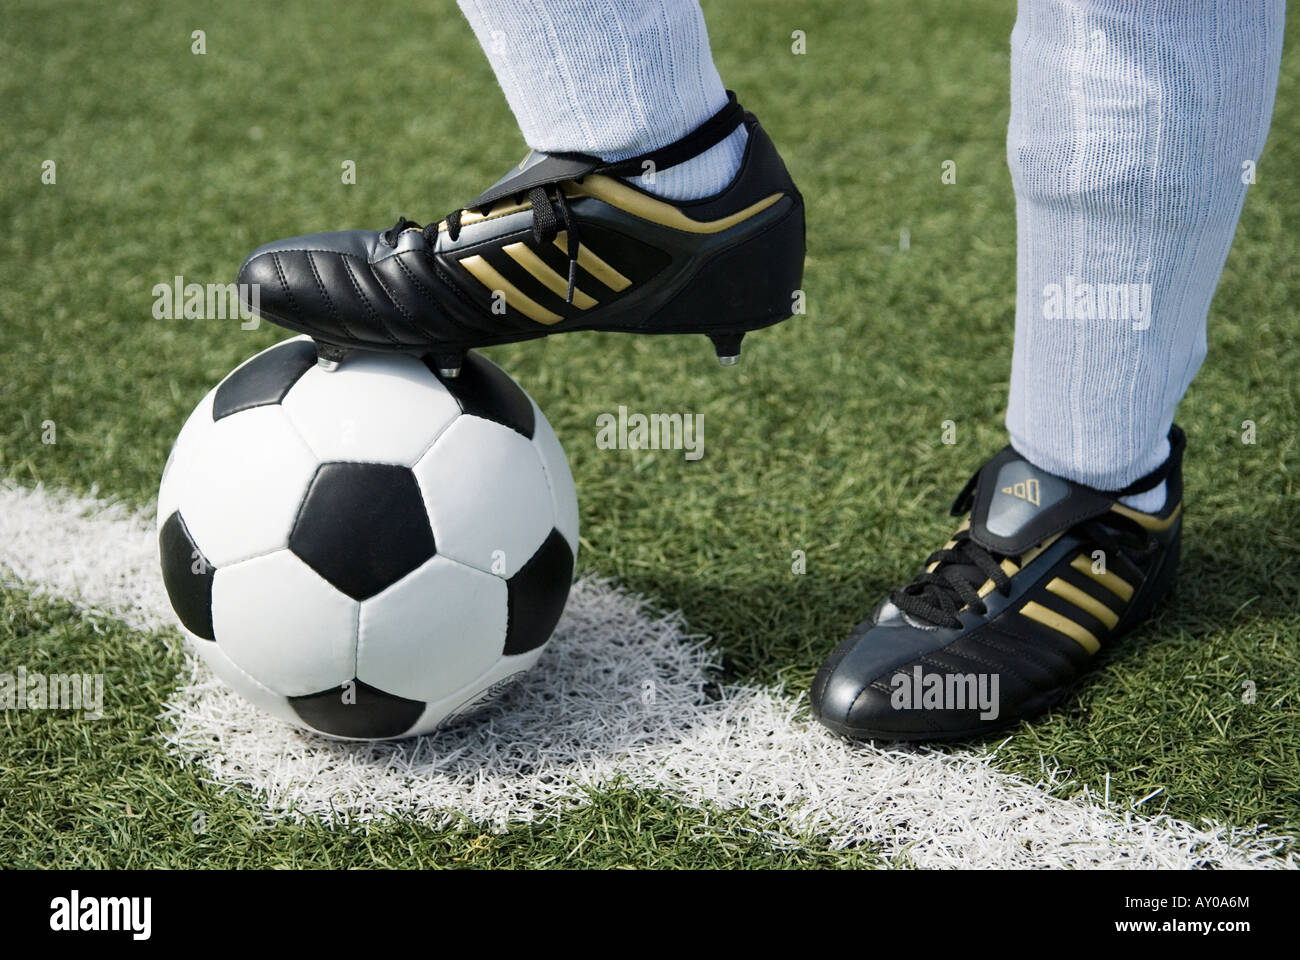 the feet of a football player in white stockings and a vintage black and white football Stock Photo